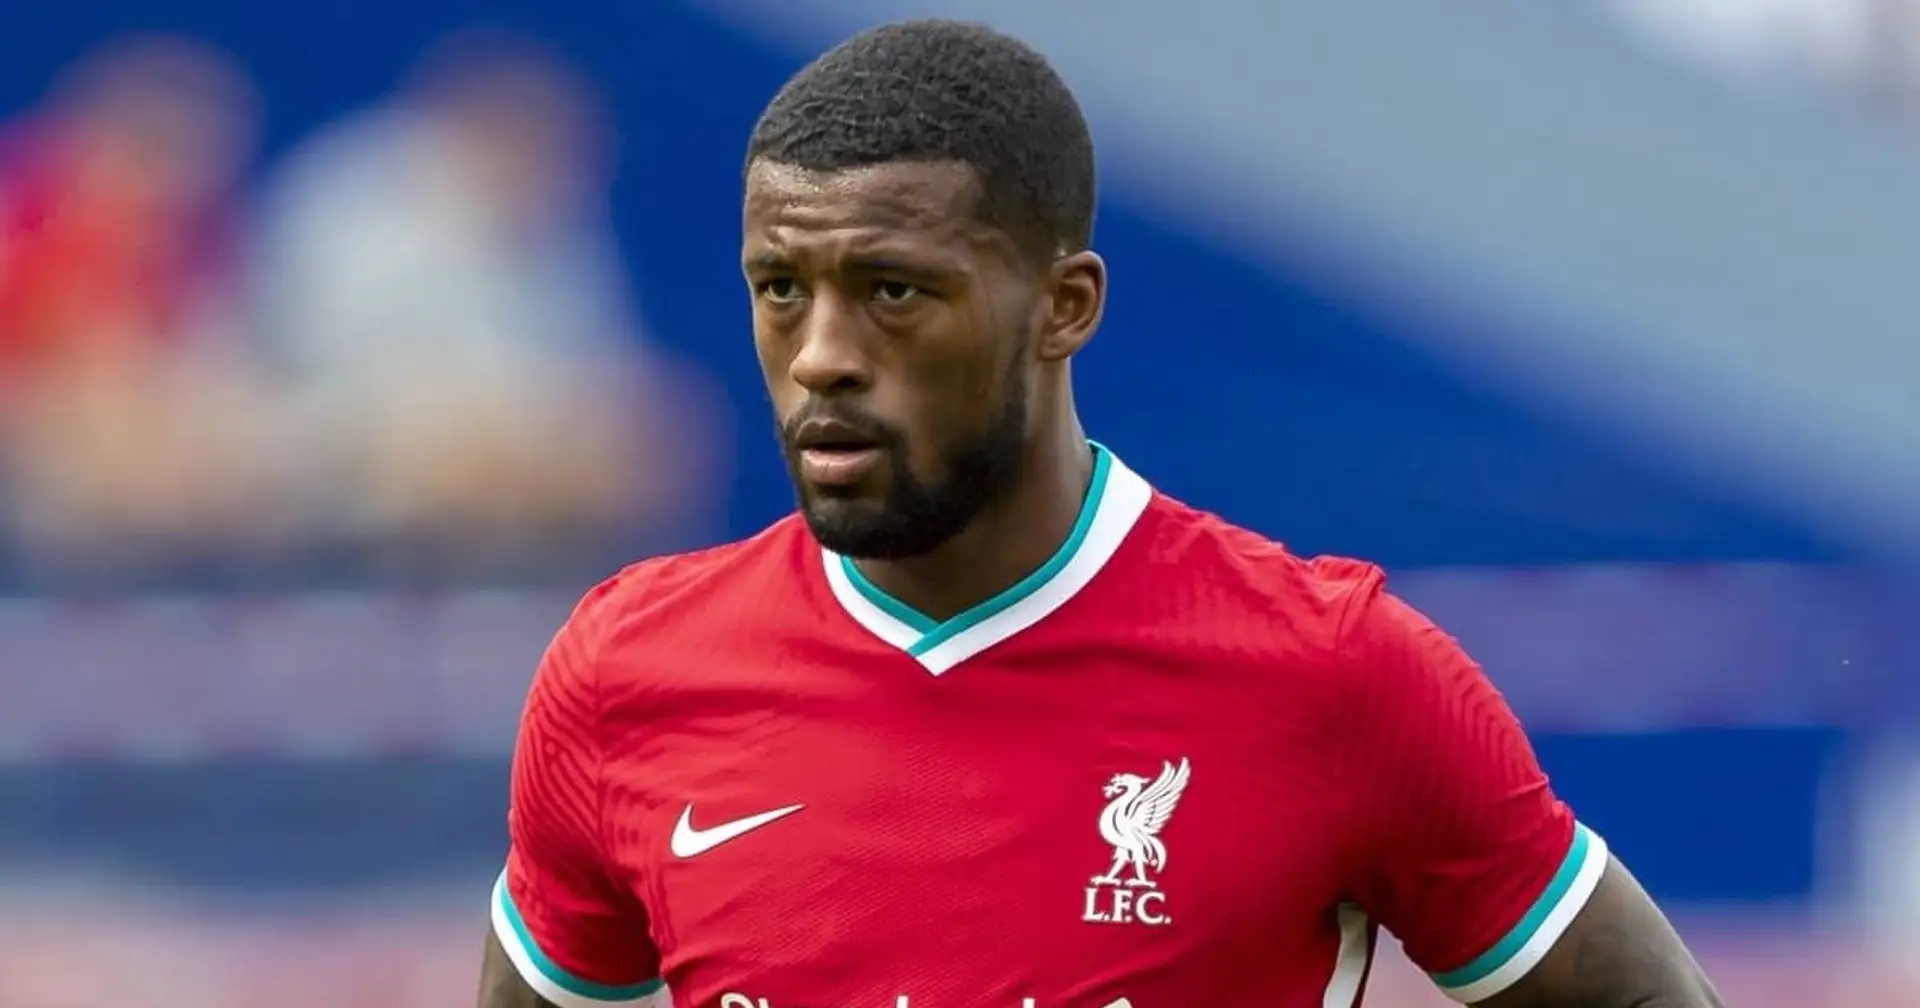 Liverpool reportedly offer Wijnaldum a new contract as Inter circle (reliability: 3 stars)